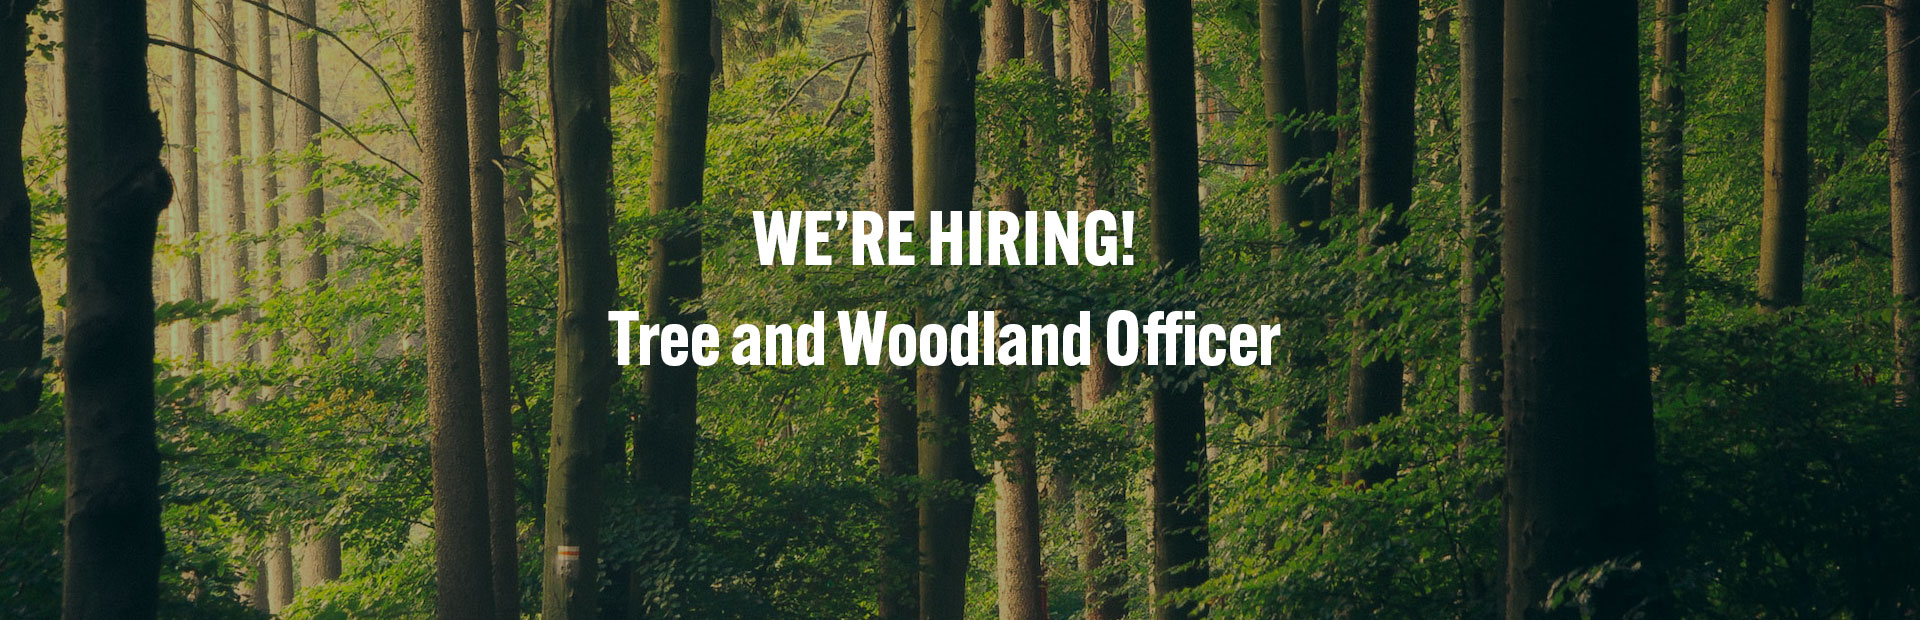 NEW VACANCY: Tree and Woodland Officer